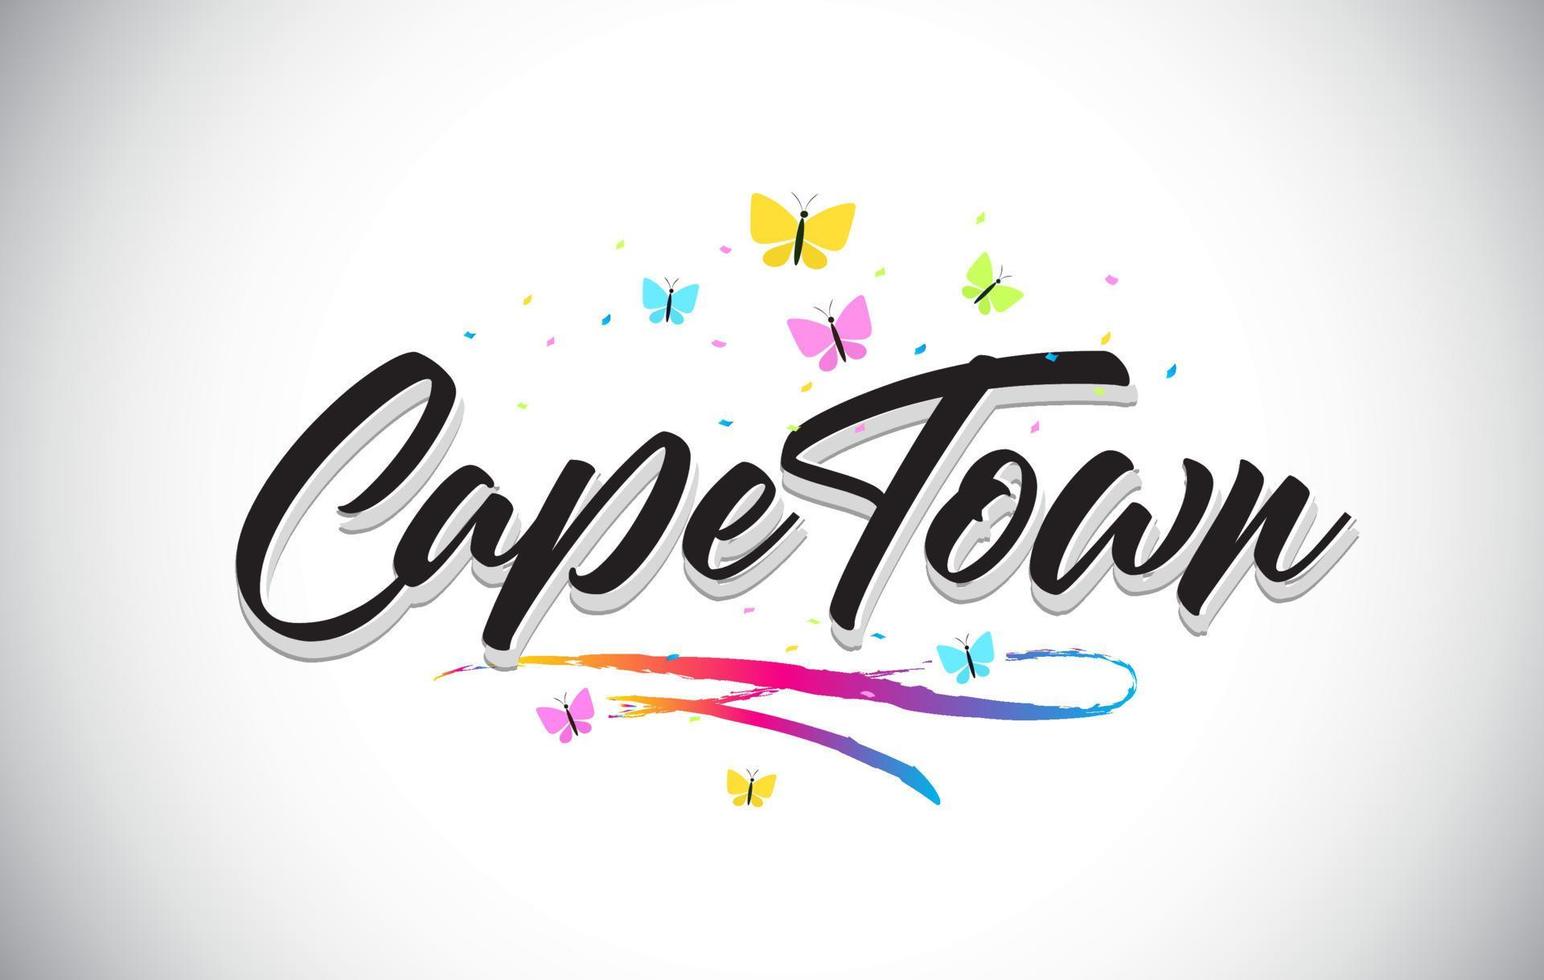 CapeTown Handwritten Vector Word Text with Butterflies and Colorful Swoosh.